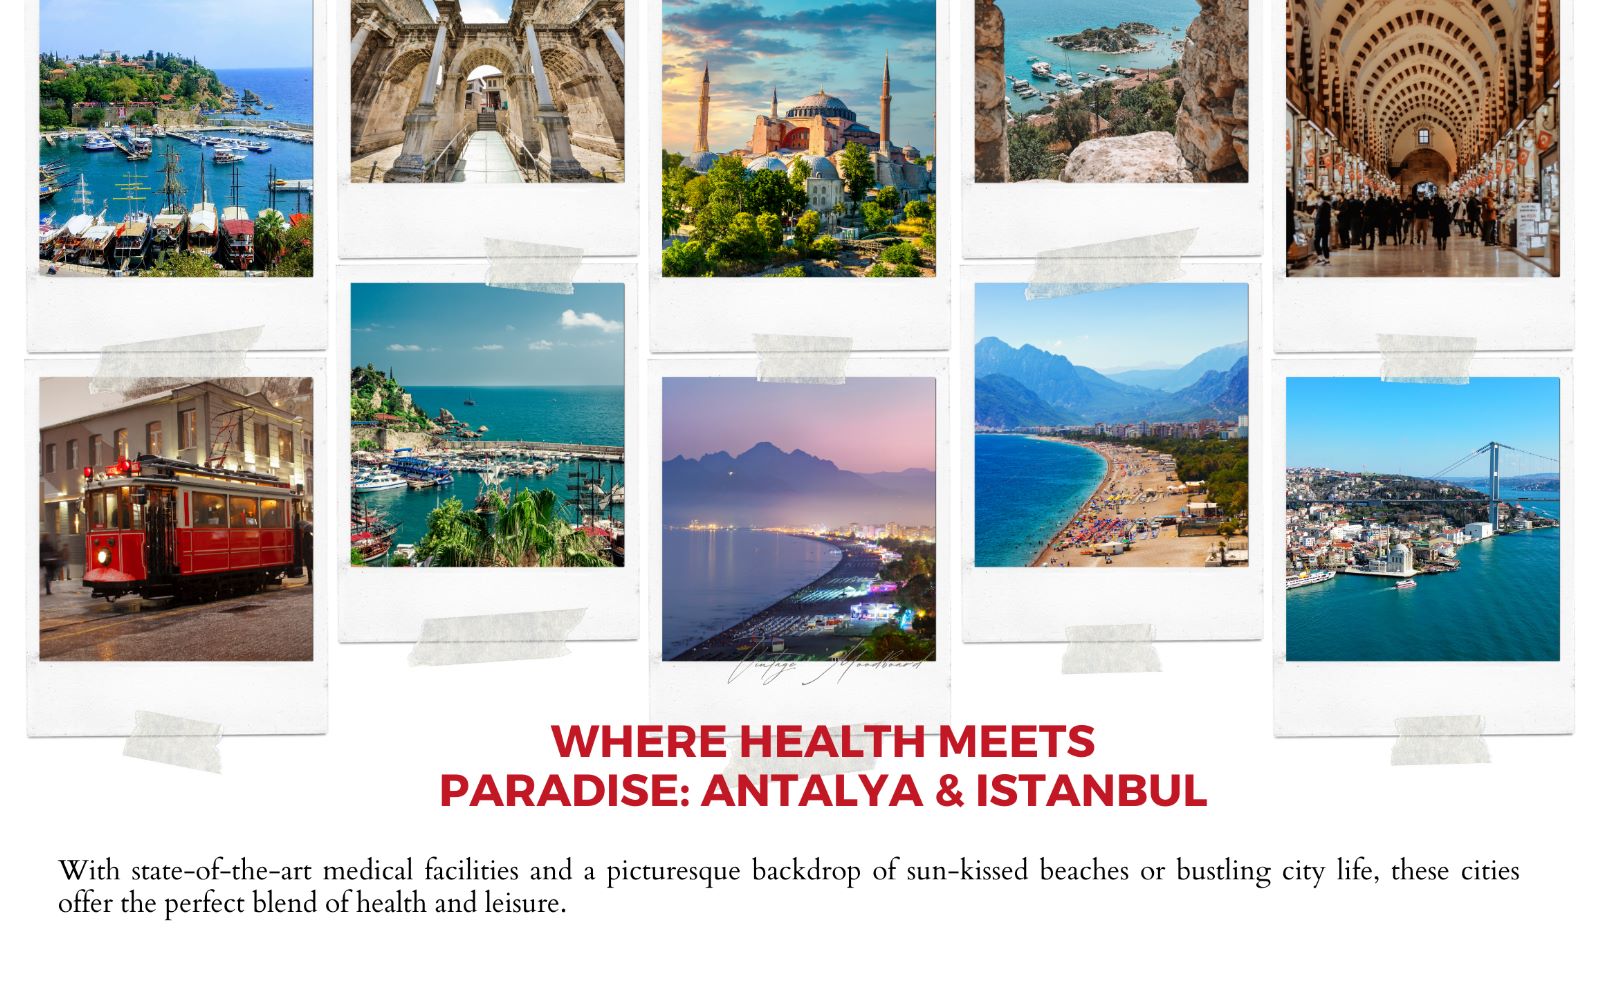 Health Tourism Destinations in Turkey - Antalya and Istanbul